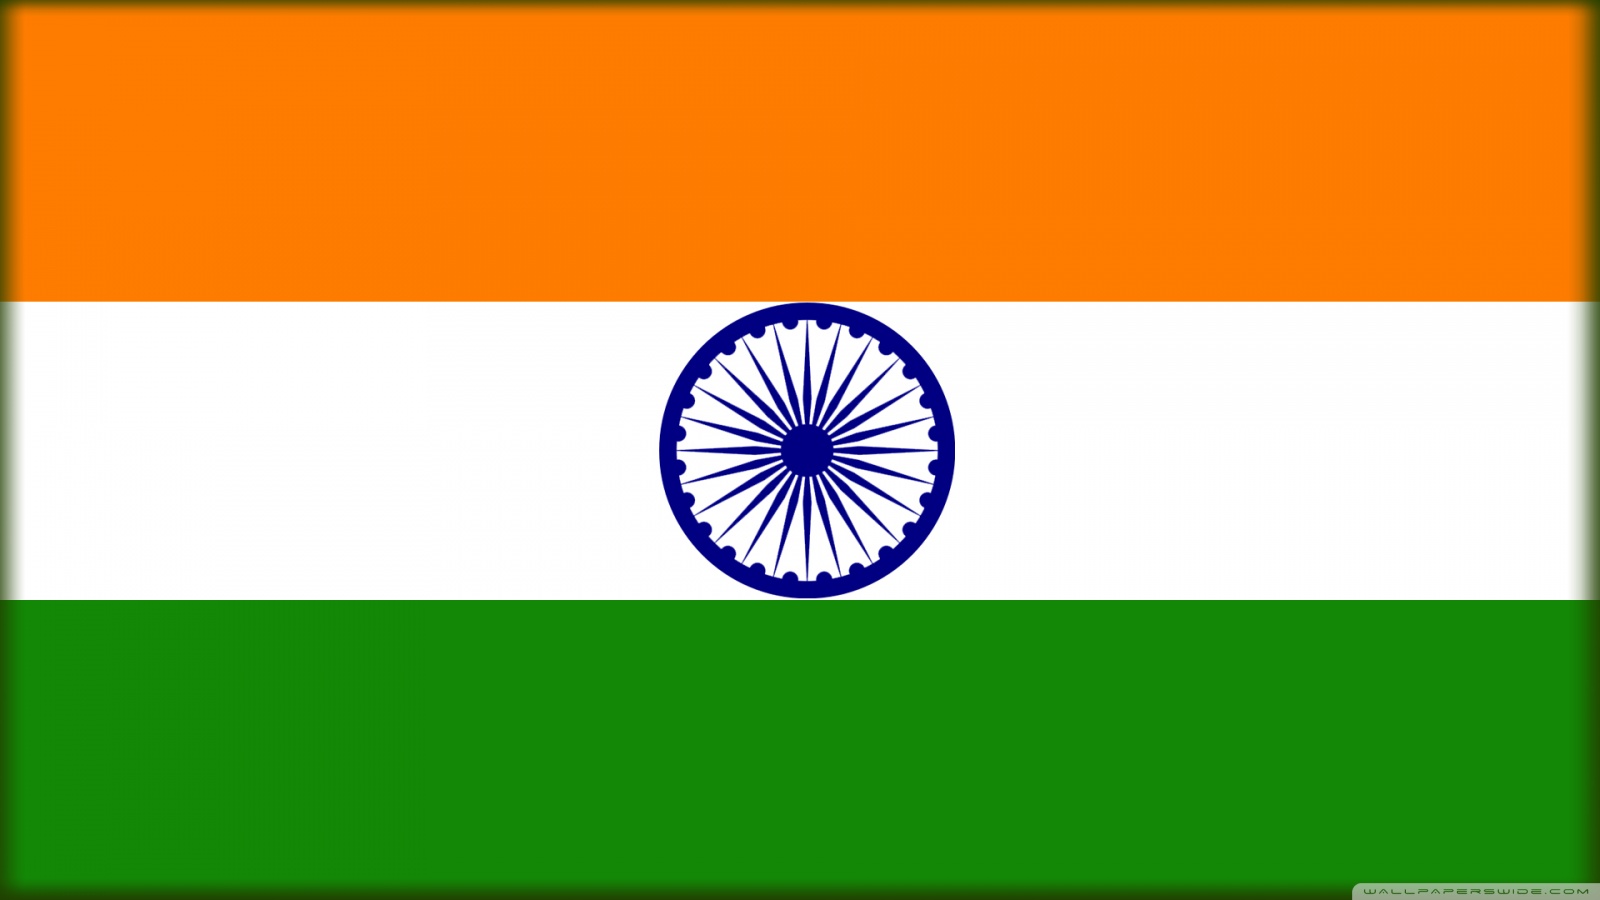 Indian Flag For Print Out 1600x900 Wallpaper teahub.io